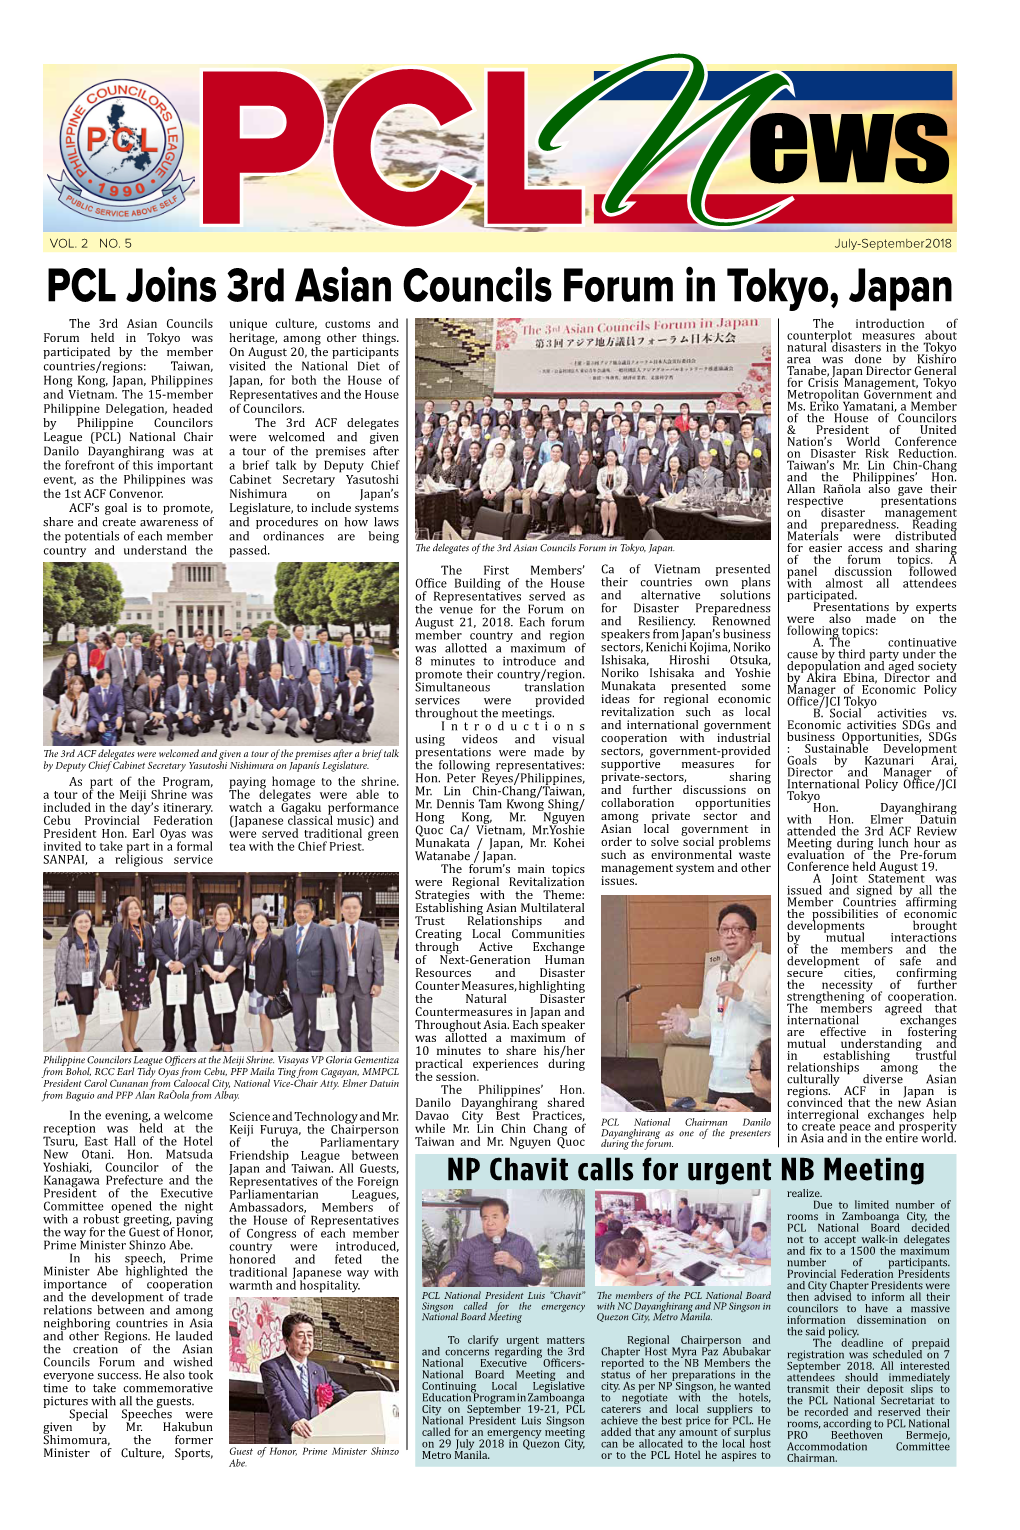 PCL Joins 3Rd Asian Councils Forum in Tokyo, Japan